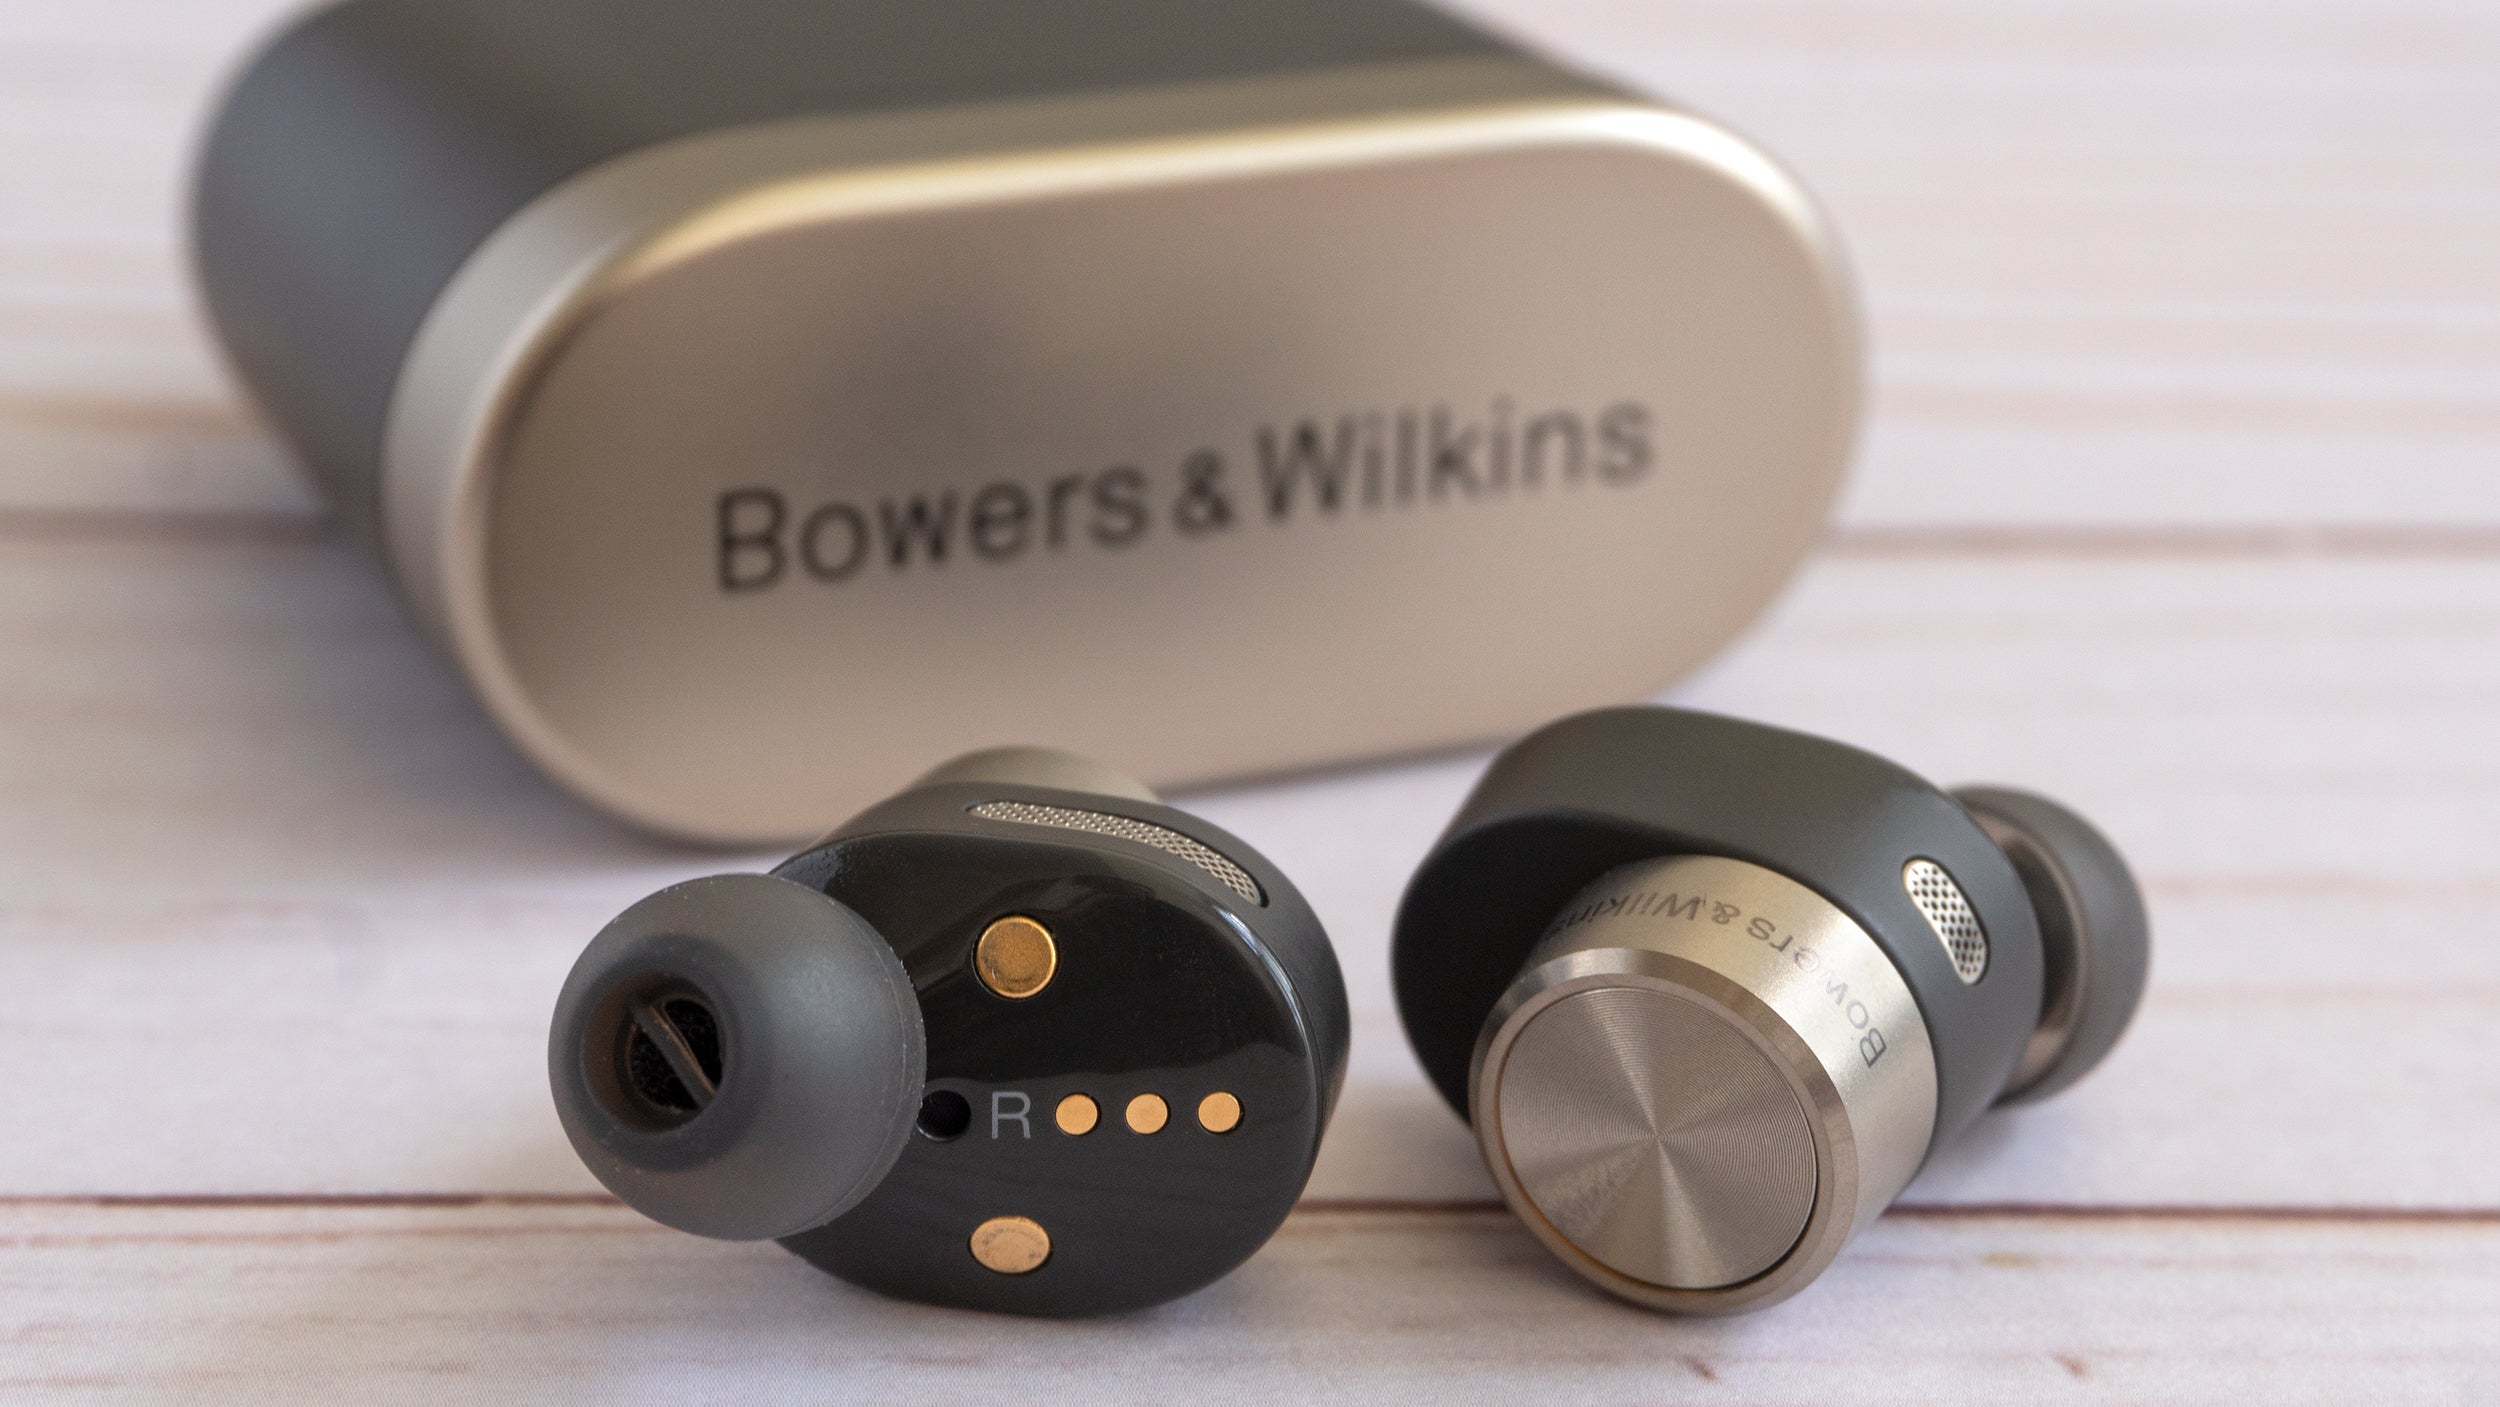 Even with all the features one could want in a pair of wireless earbuds, the PI7's $US400 ($514) price tag is a tough sell. (Photo: Andrew Liszewski/Gizmodo)